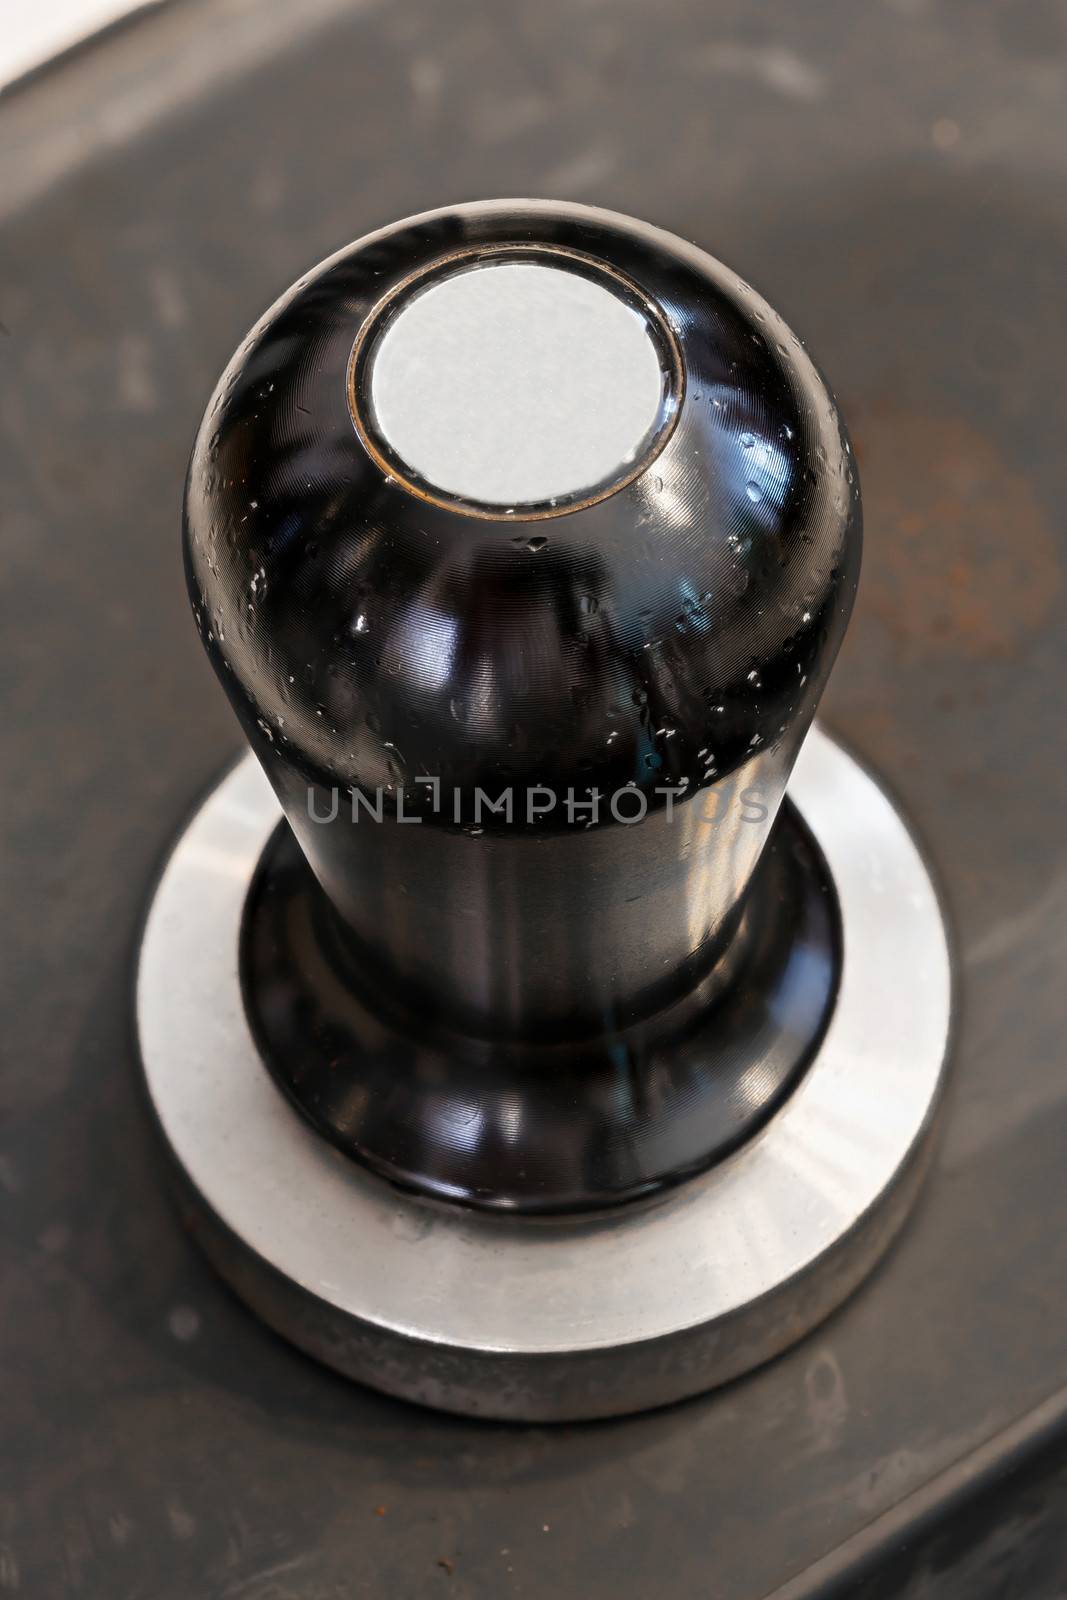 Coffee tamper by smuay